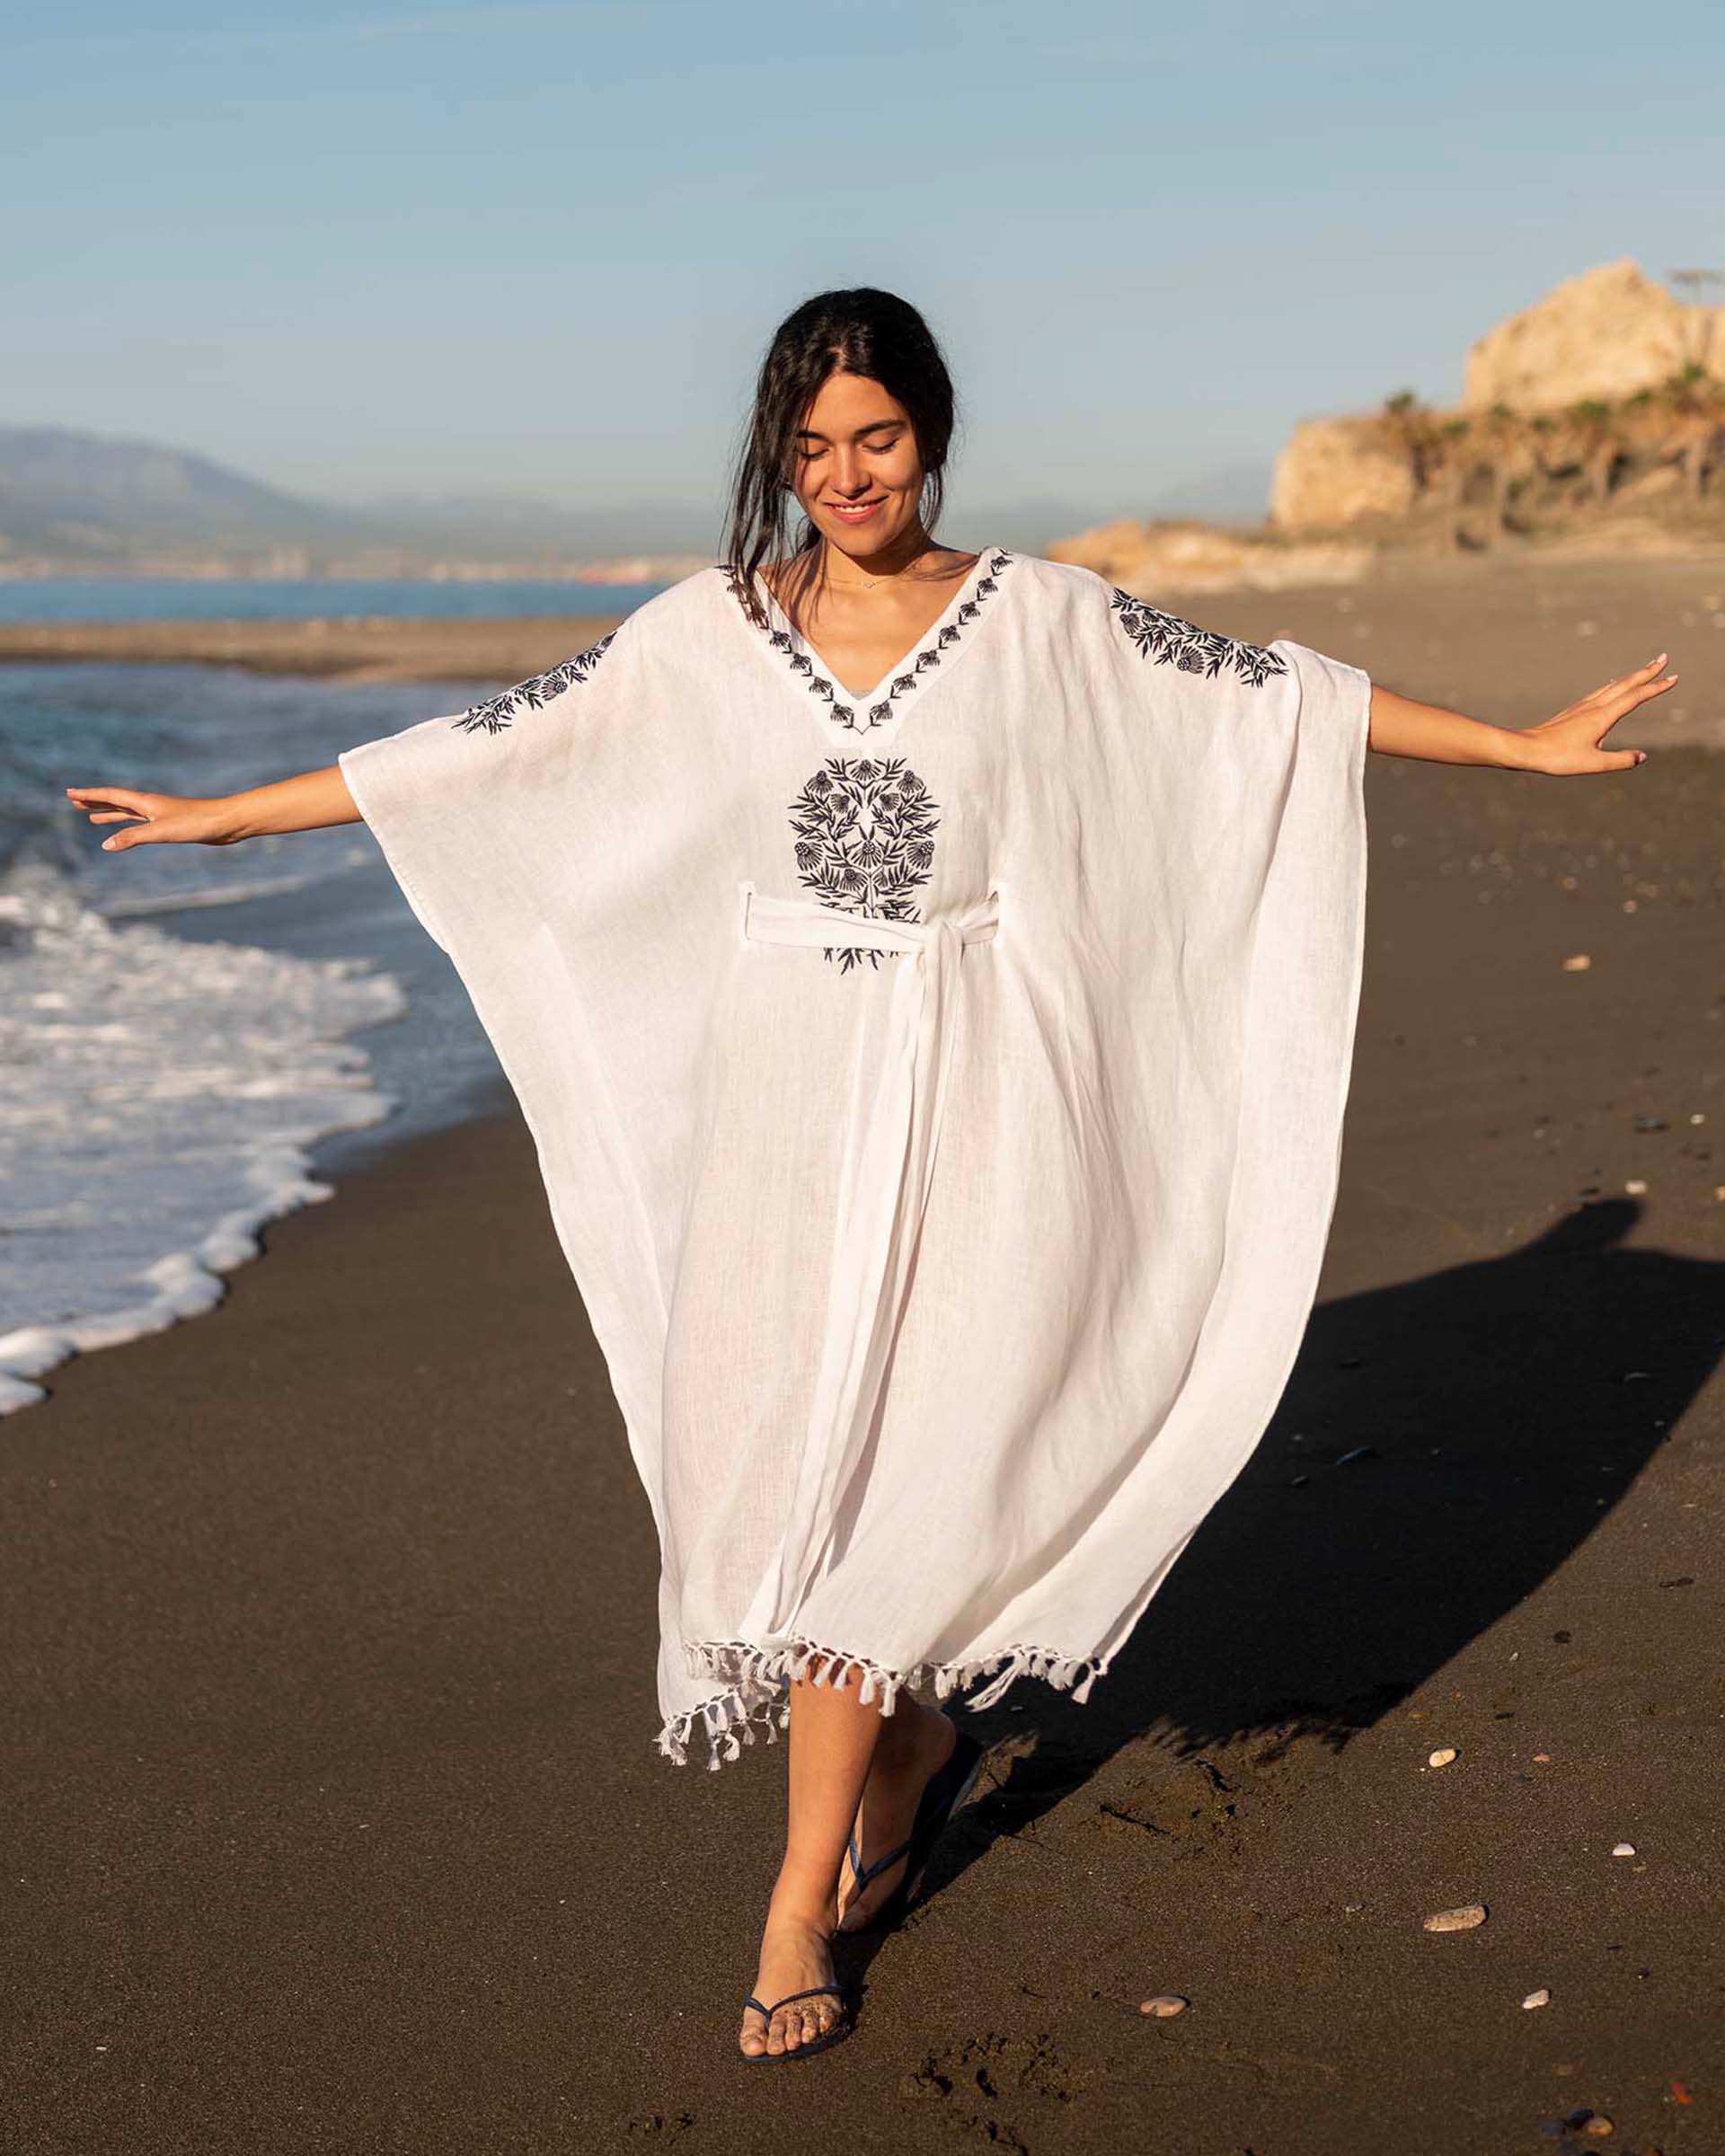 Brown hair female walks on the beach with arms wide open wearing a white cover up with embroidered details